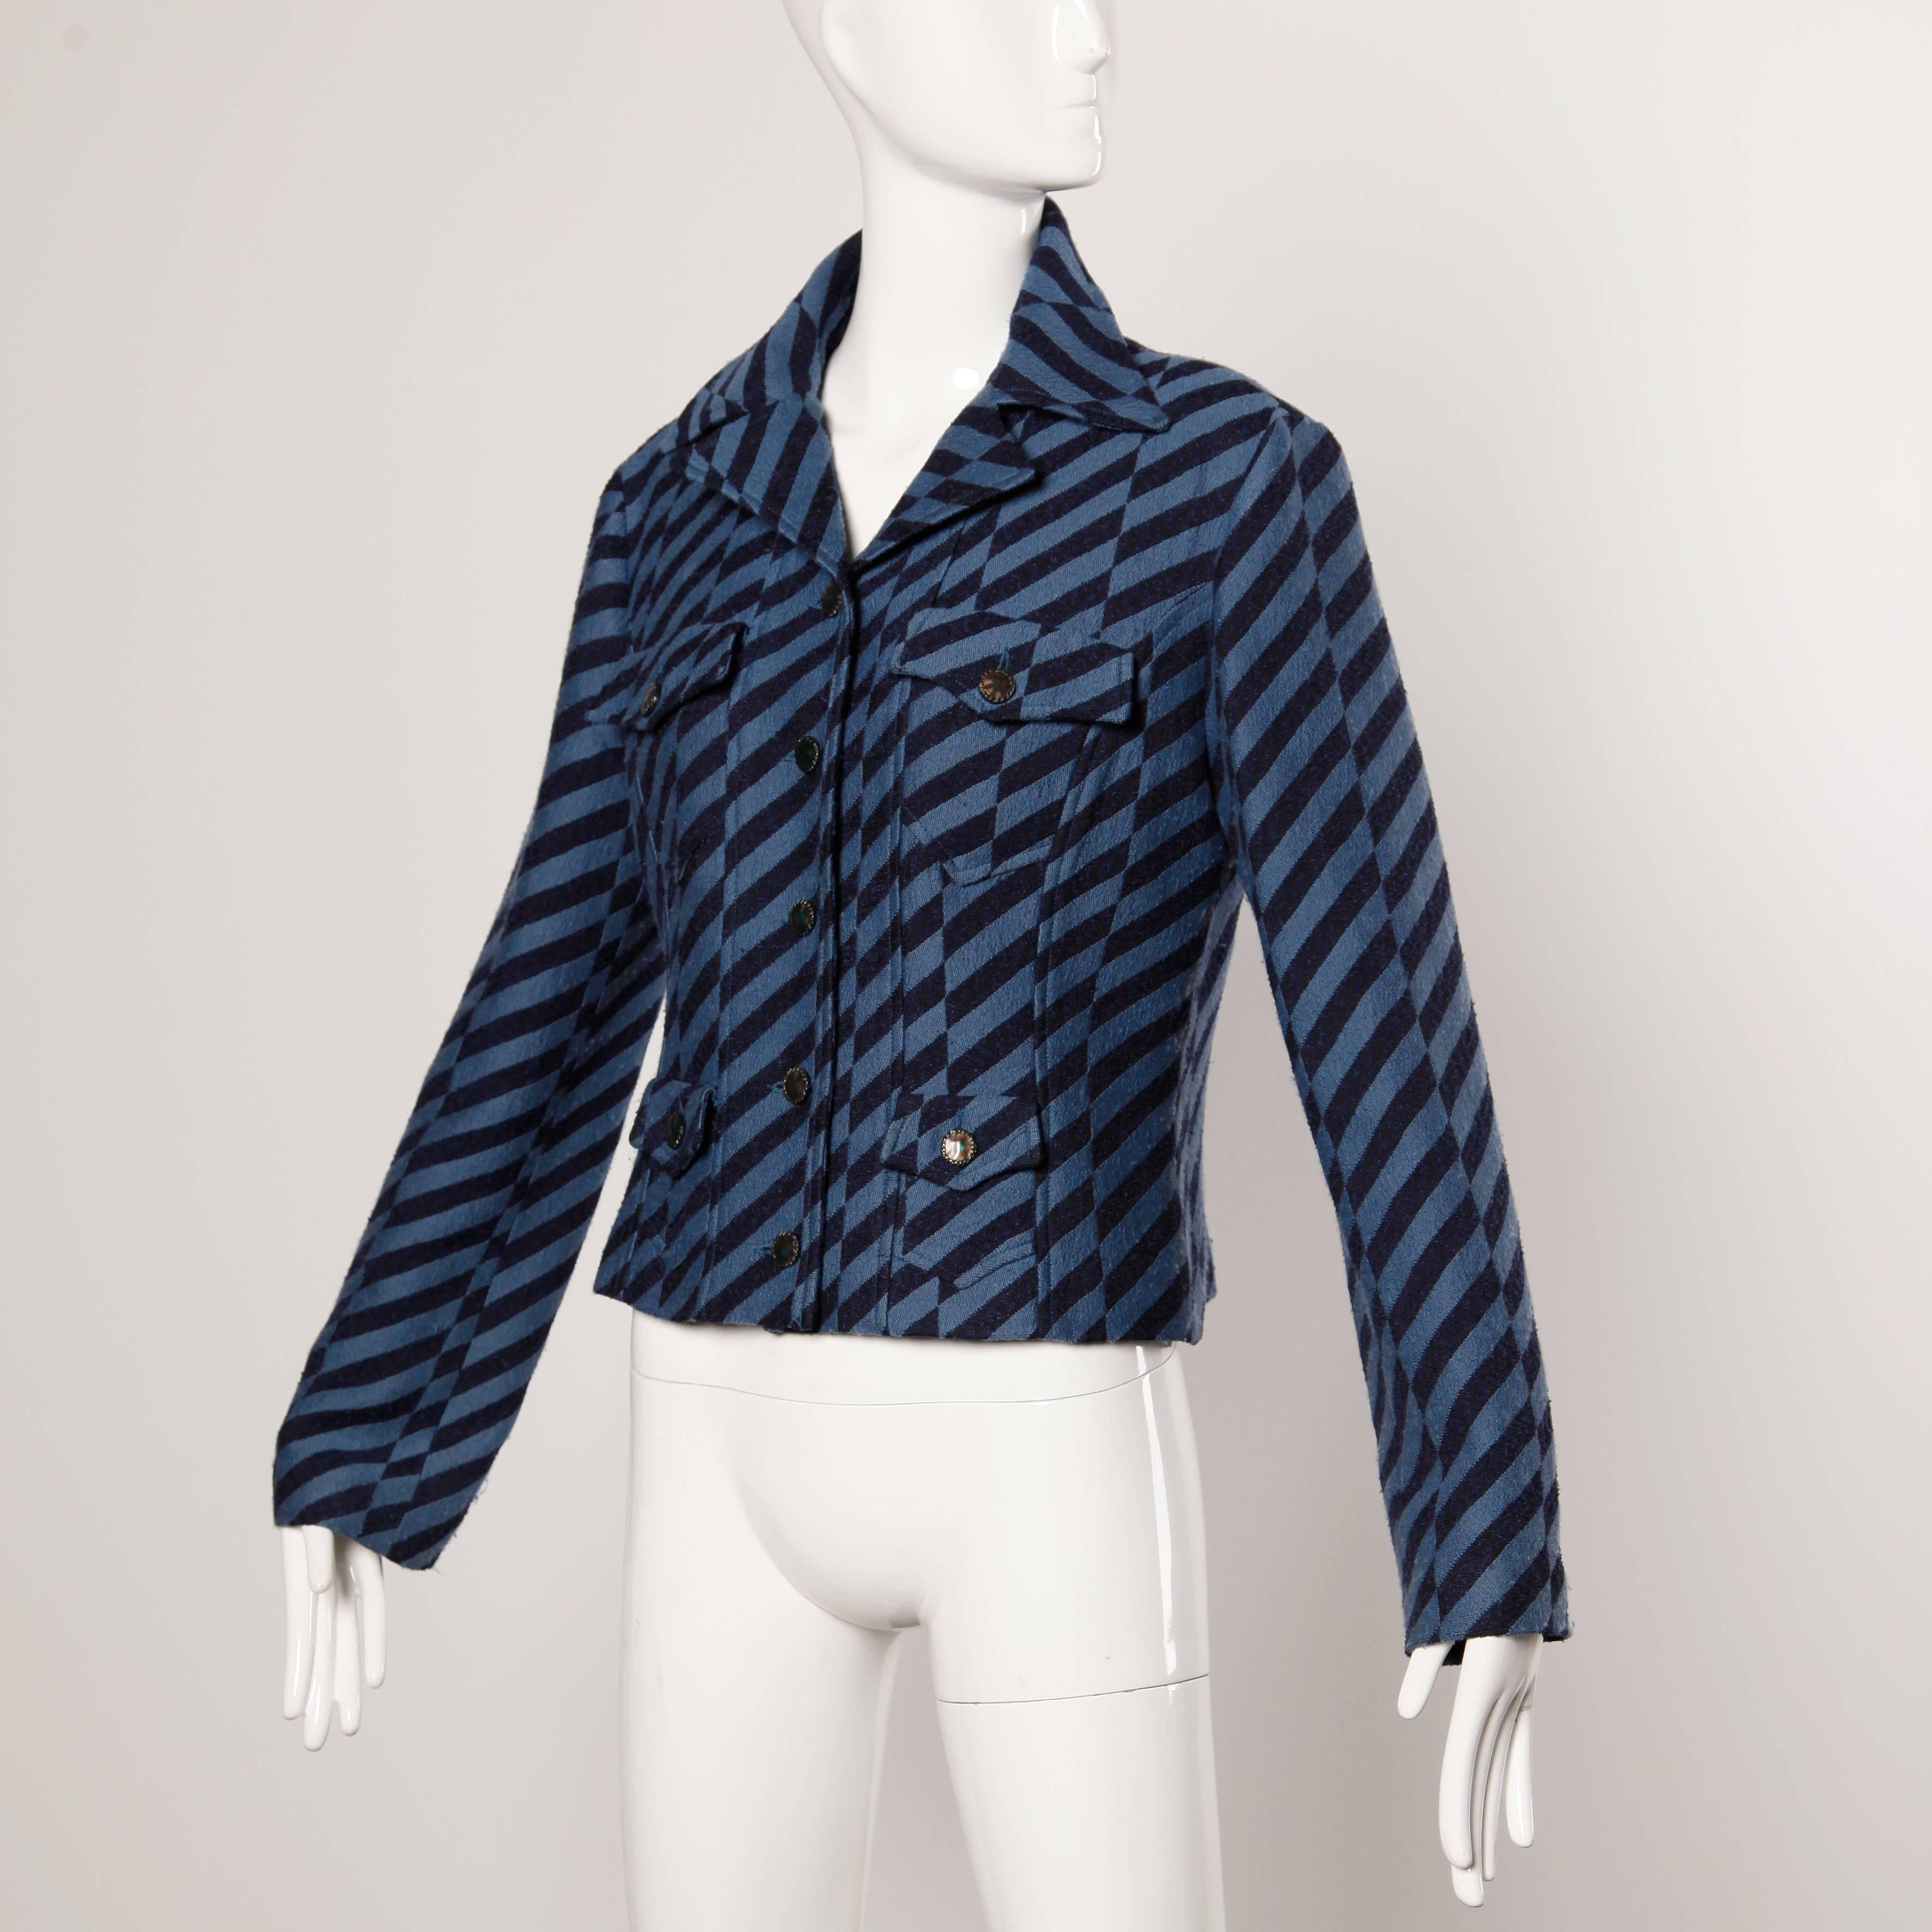 Christian Lacroix Vintage Striped Two Tone Blue Military Jacket, 1980s  In Excellent Condition For Sale In Sparks, NV